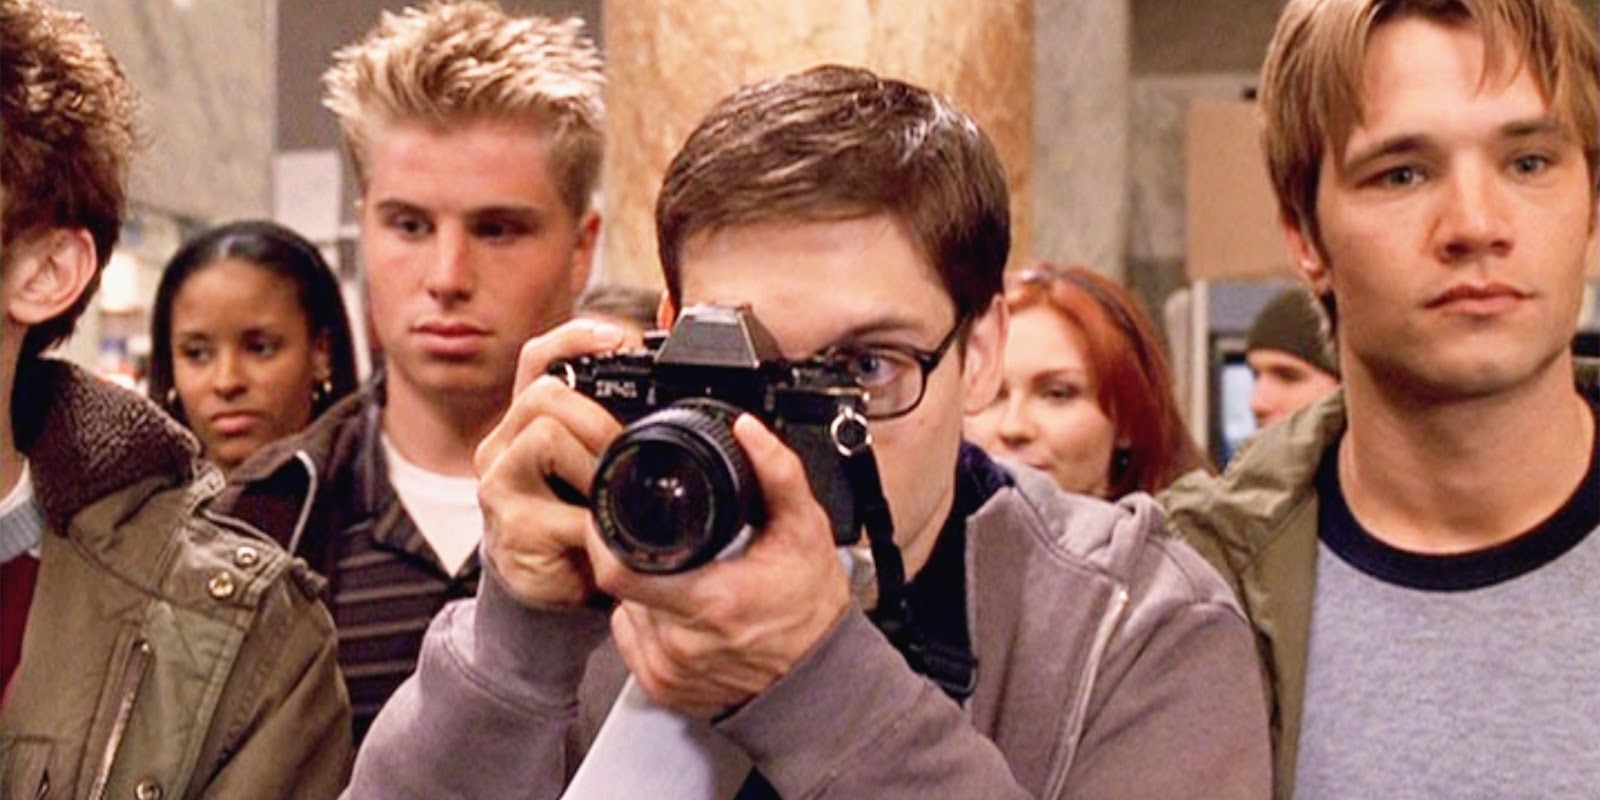 Peter Parker taking a photo in Spider-Man